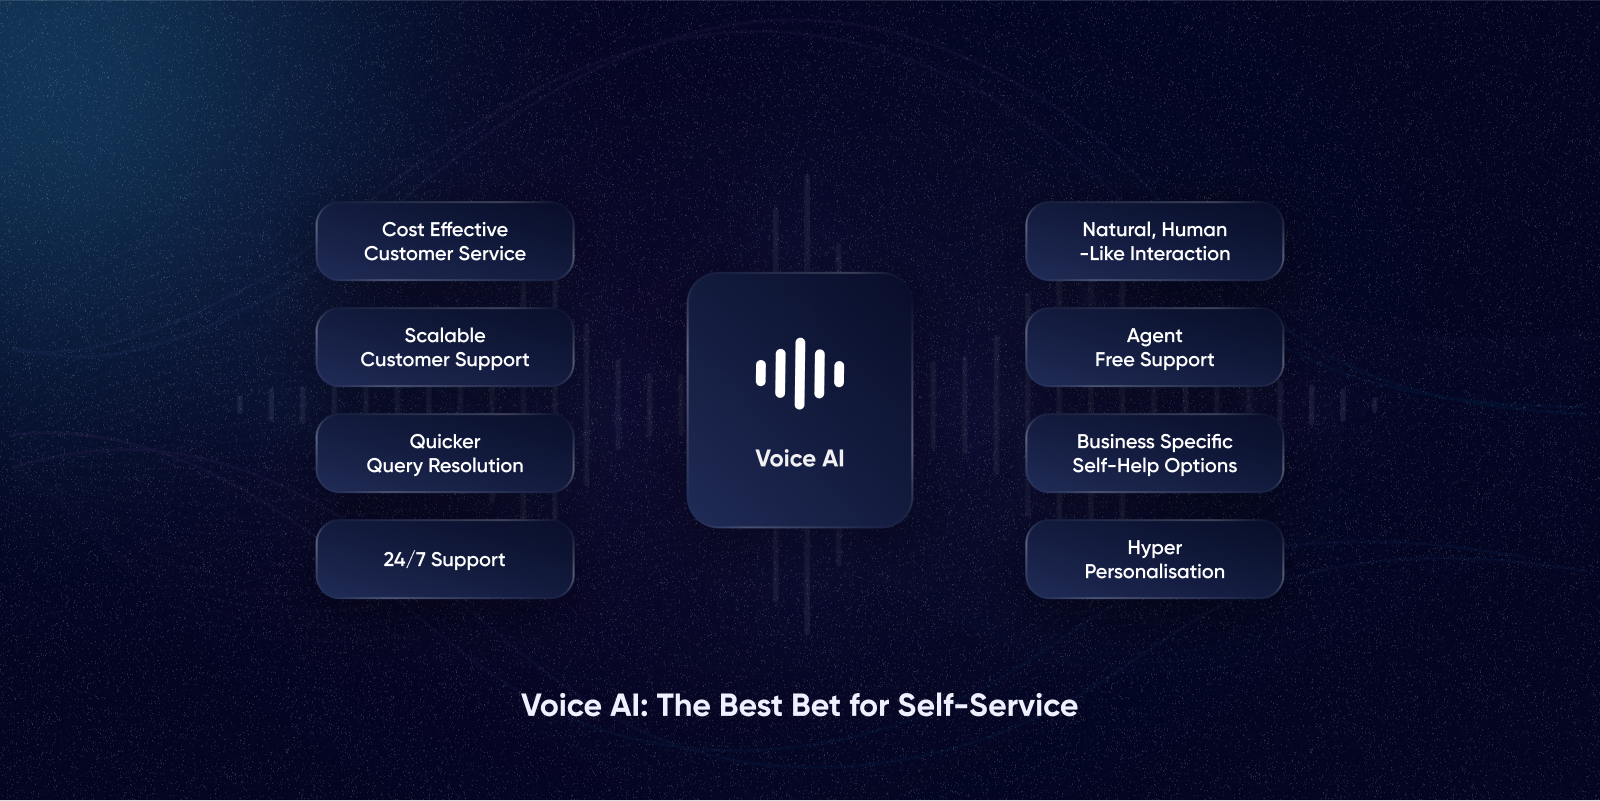 Voice AI: The Best Bet for Self-Service